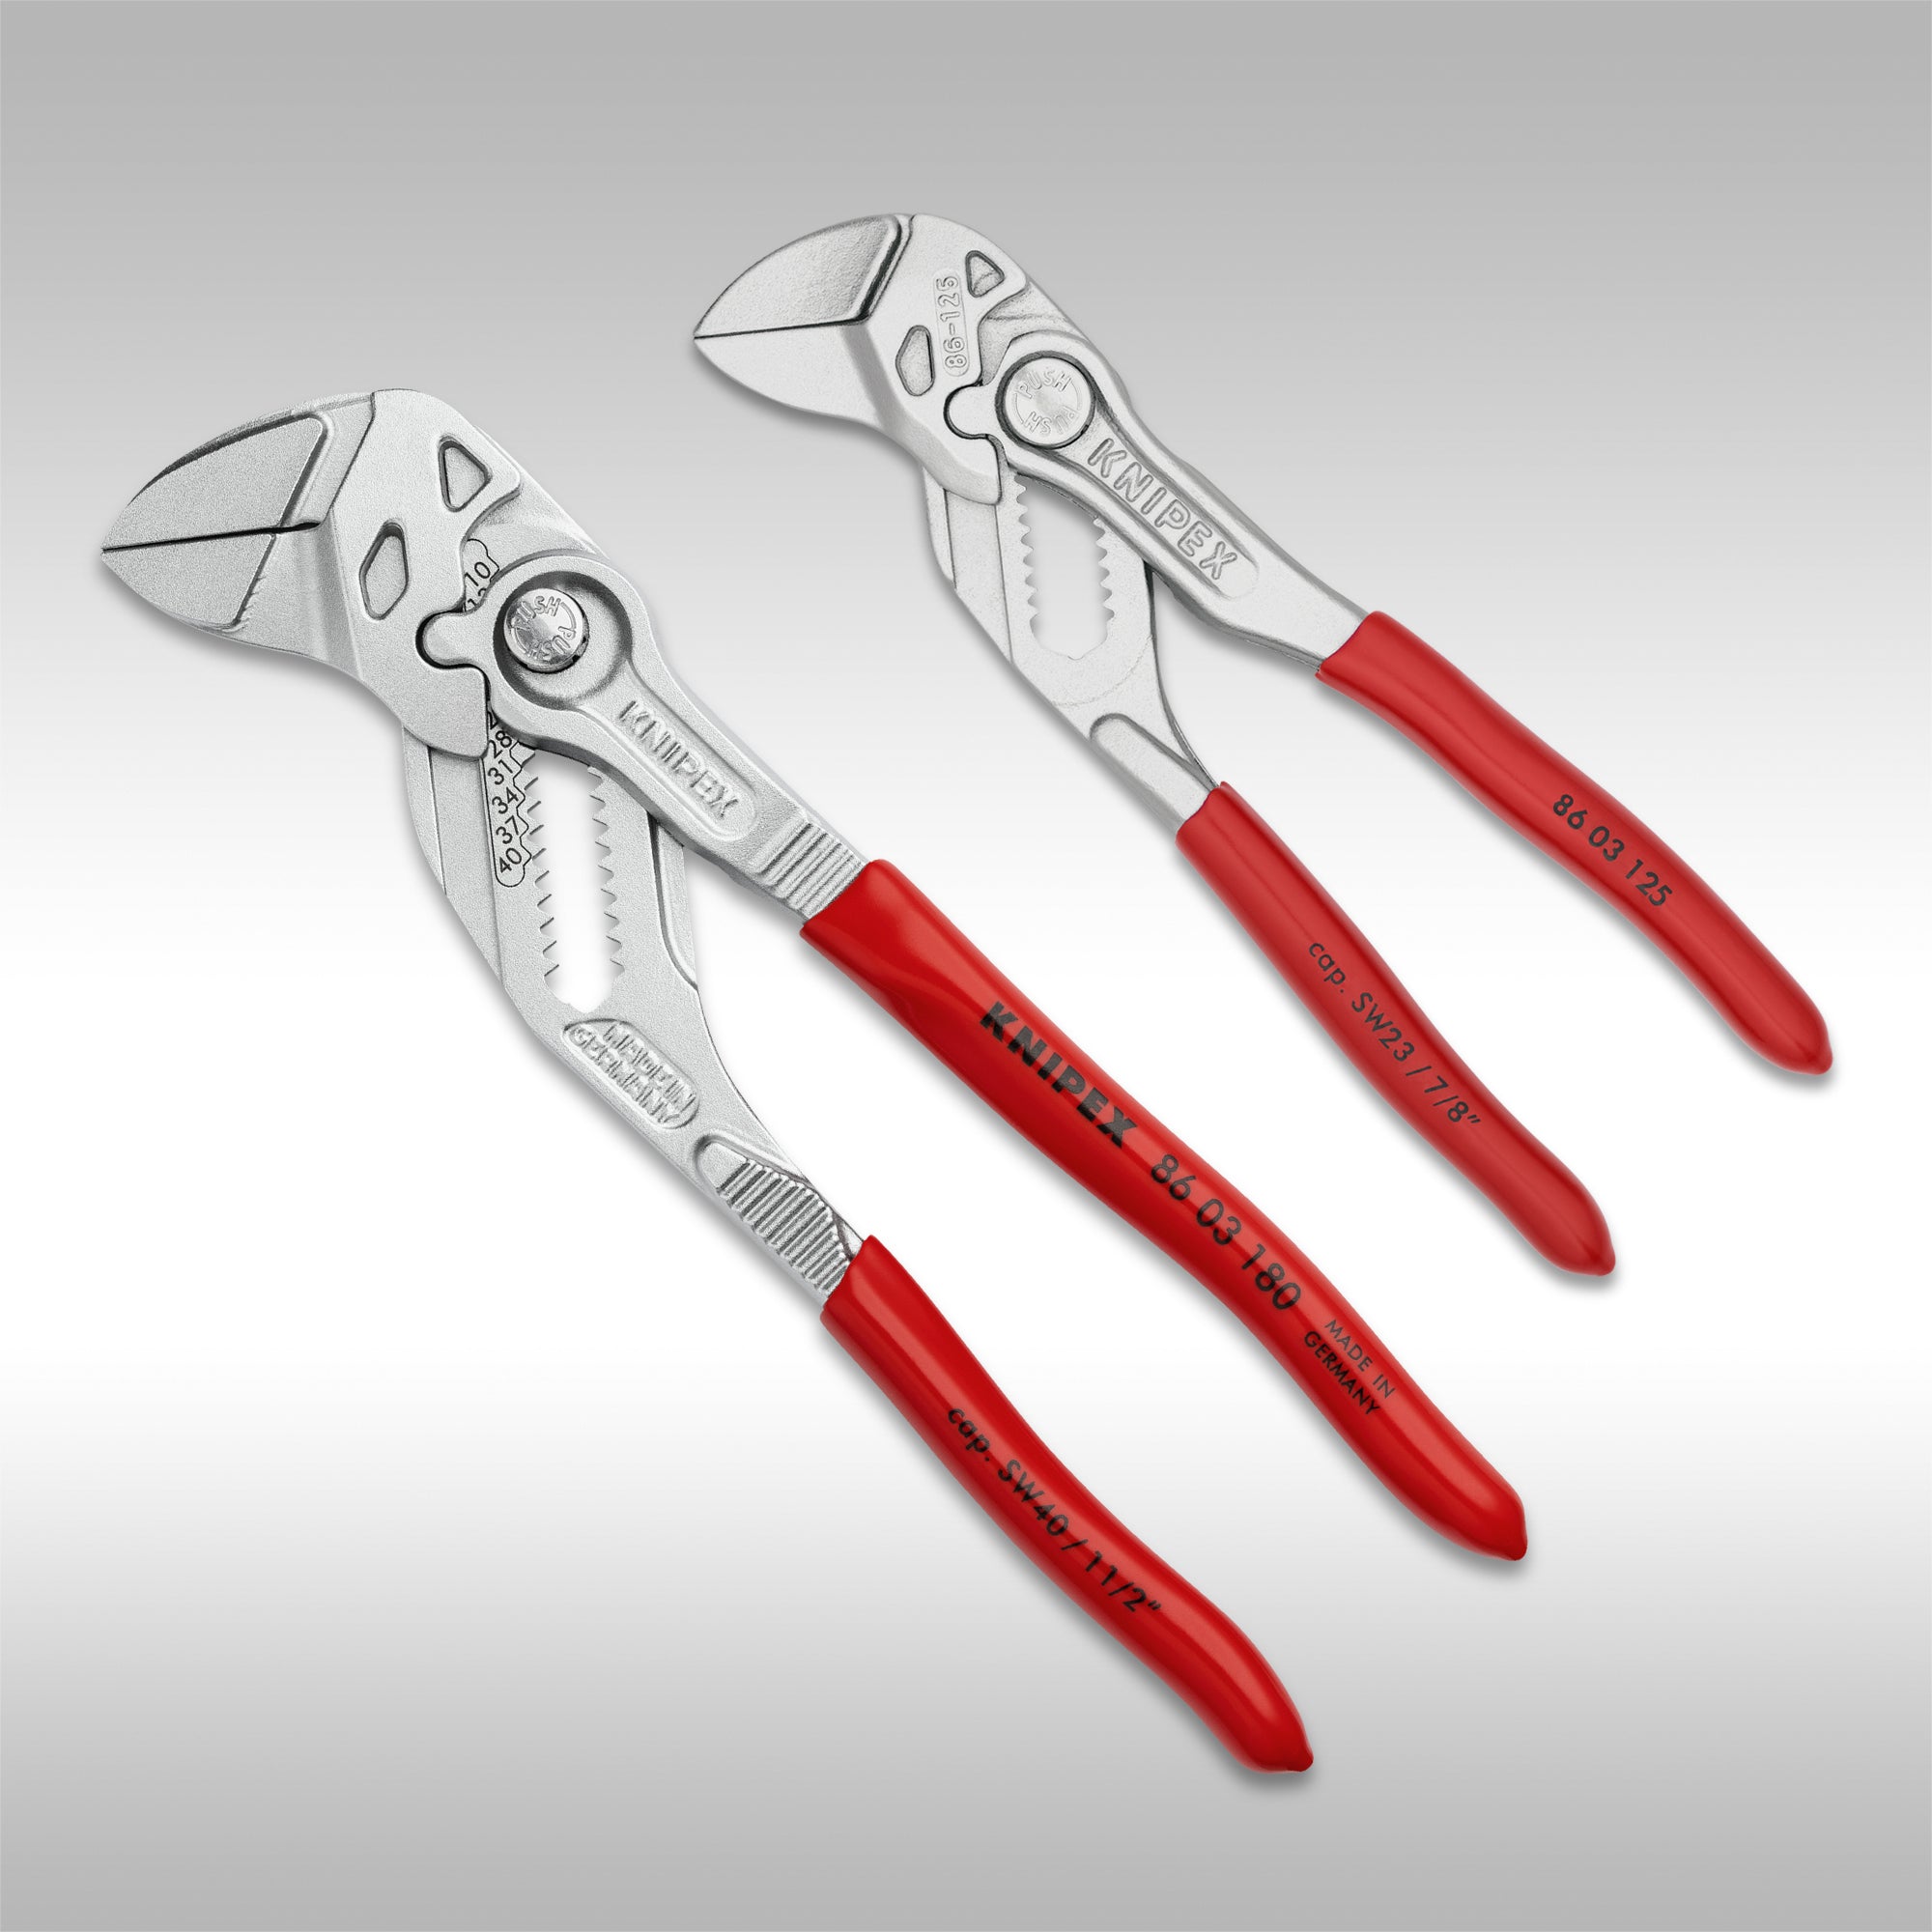 KNIPEX - 2PC MINI PLIERS WRENCH SET - 5" & 7 1/4"